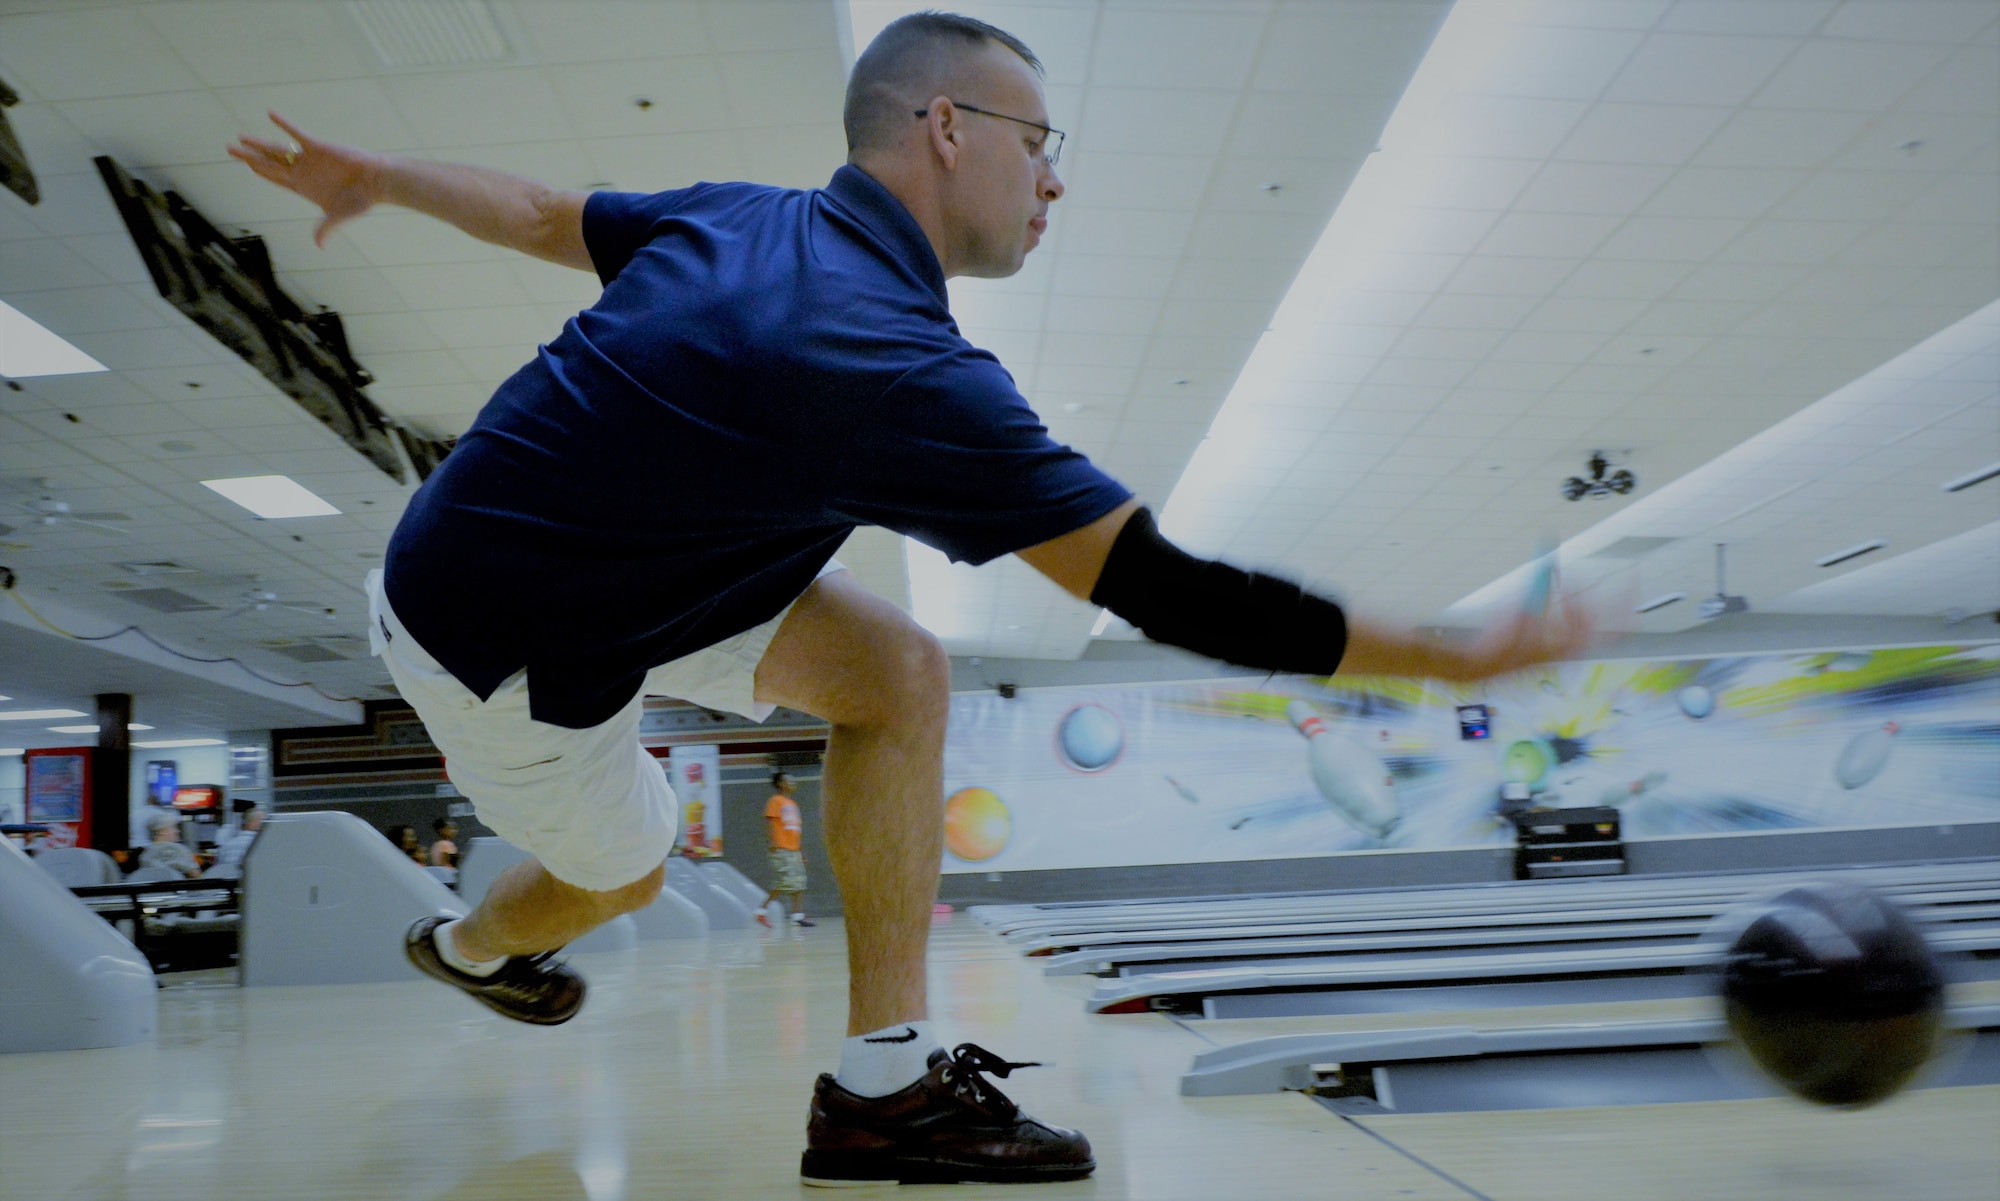 Window opens for DAF Sports bowling > Air Force Global Strike Command ...